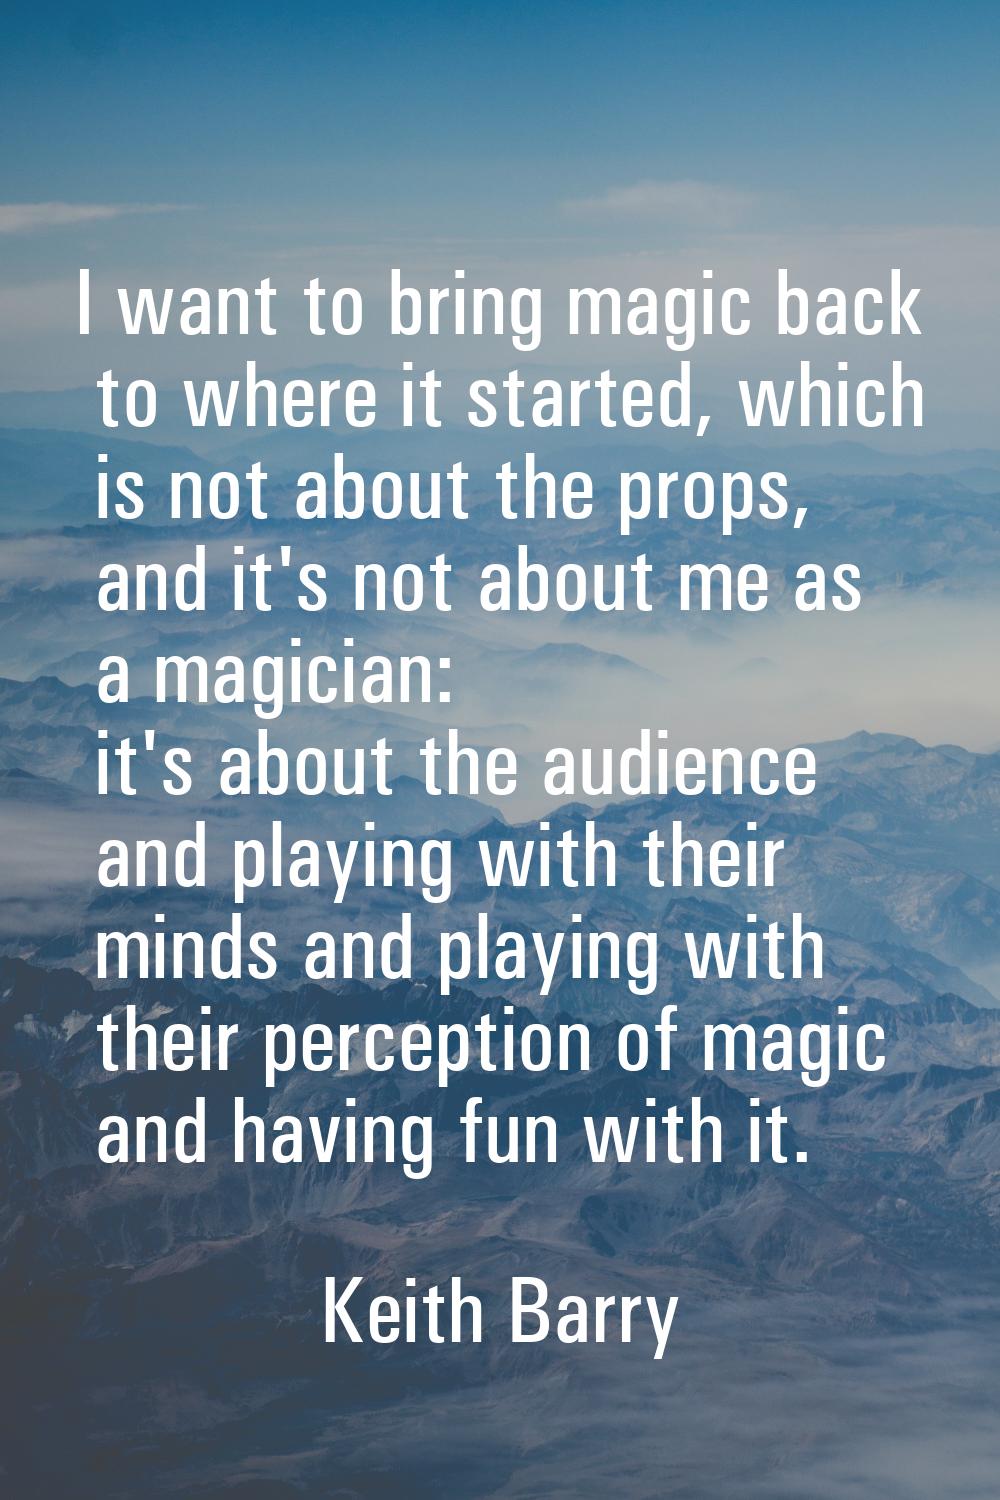 I want to bring magic back to where it started, which is not about the props, and it's not about me